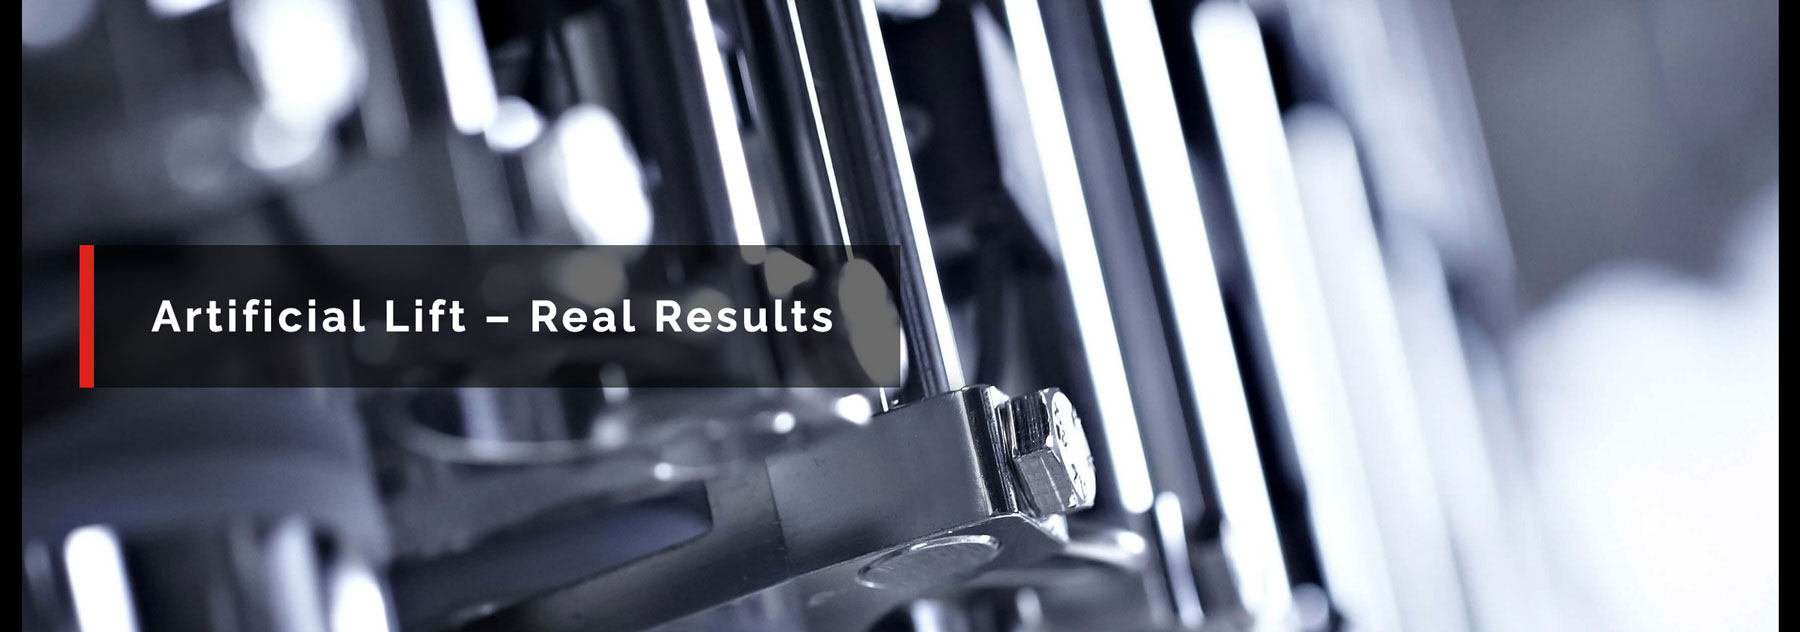 Artificial Lift - Real Results